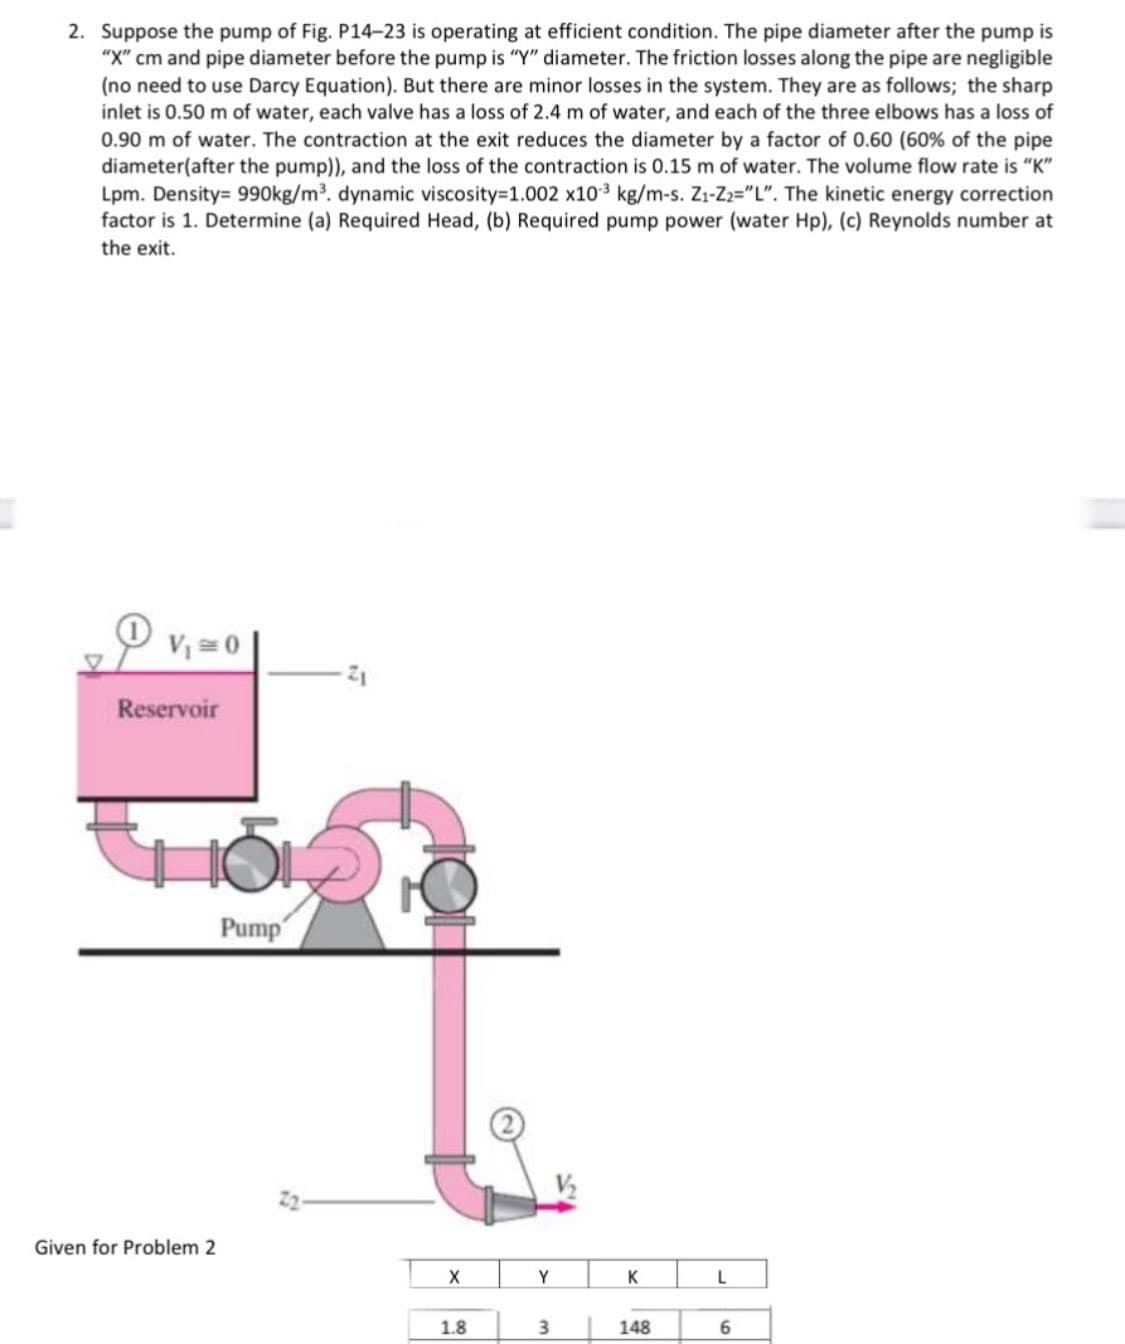 2. Suppose the pump of Fig. P14-23 is operating at efficient condition. The pipe diameter after the pump is
"X" cm and pipe diameter before the pump is "Y" diameter. The friction losses along the pipe are negligible
(no need to use Darcy Equation). But there are minor losses in the system. They are as follows; the sharp
inlet is 0.50 m of water, each valve has a loss of 2.4 m of water, and each of the three elbows has a loss of
0.90 m of water. The contraction at the exit reduces the diameter by a factor of 0.60 (60% of the pipe
diameter(after the pump)), and the loss of the contraction is 0.15 m of water. The volume flow rate is "K"
Lpm. Density= 990kg/m. dynamic viscosity=1.002 x103 kg/m-s. Z1-Z2="L". The kinetic energy correction
factor is 1. Determine (a) Required Head, (b) Required pump power (water Hp), (c) Reynolds number at
the exit.
V = 0
Reservoir
Pump
Given for Problem 2
X
Y
K
L
1.8
148
6
